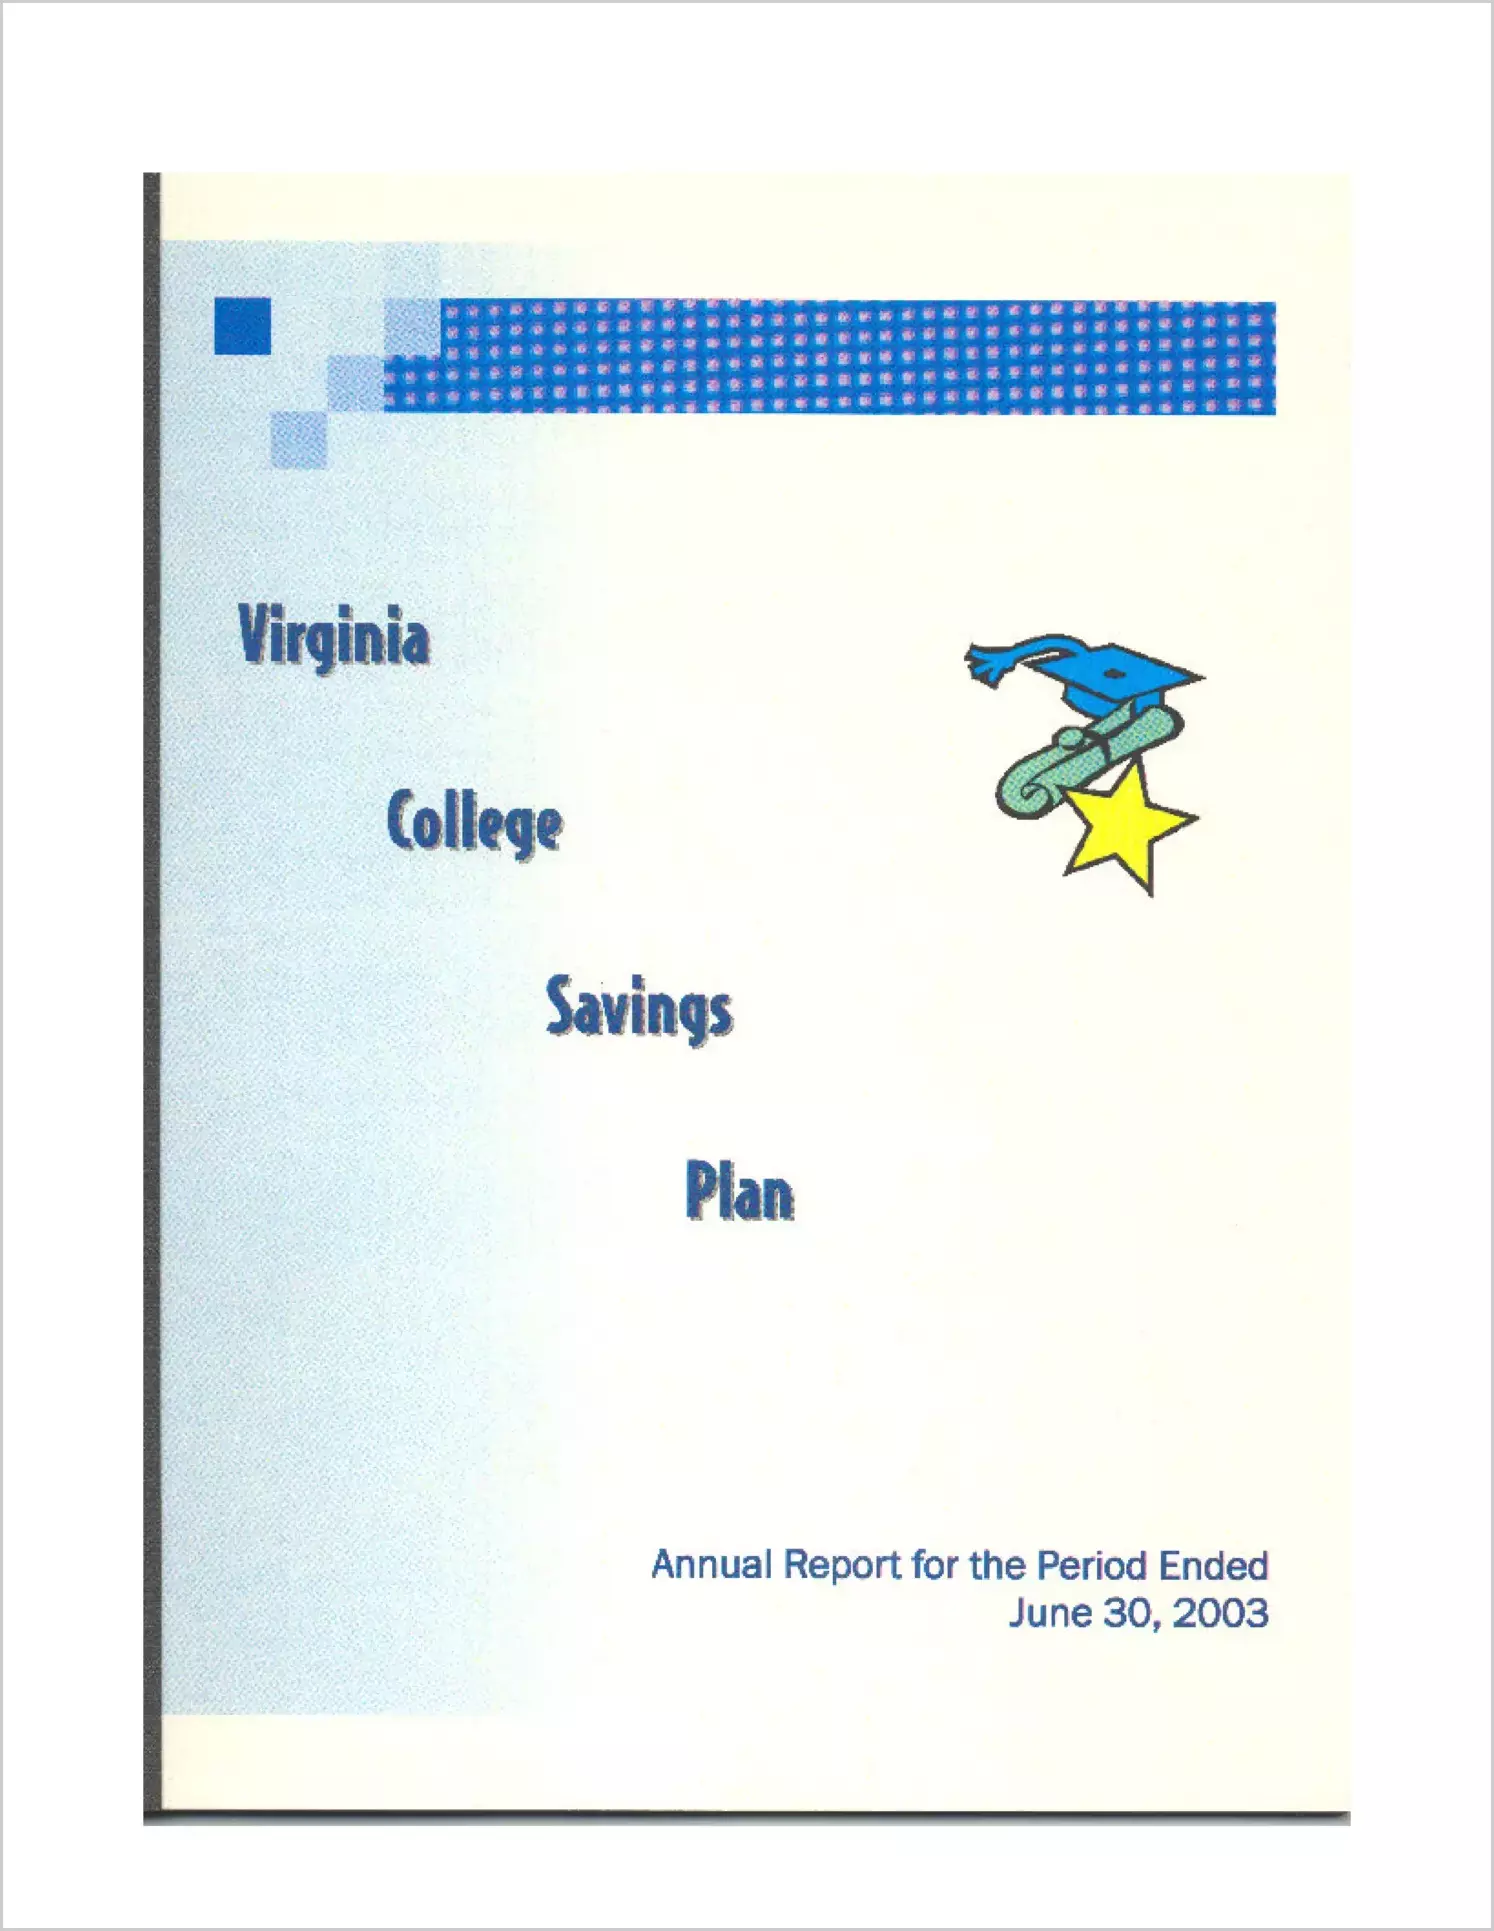 Virginia College Savings Plan, Annual Report for the period ended June 30, 2003